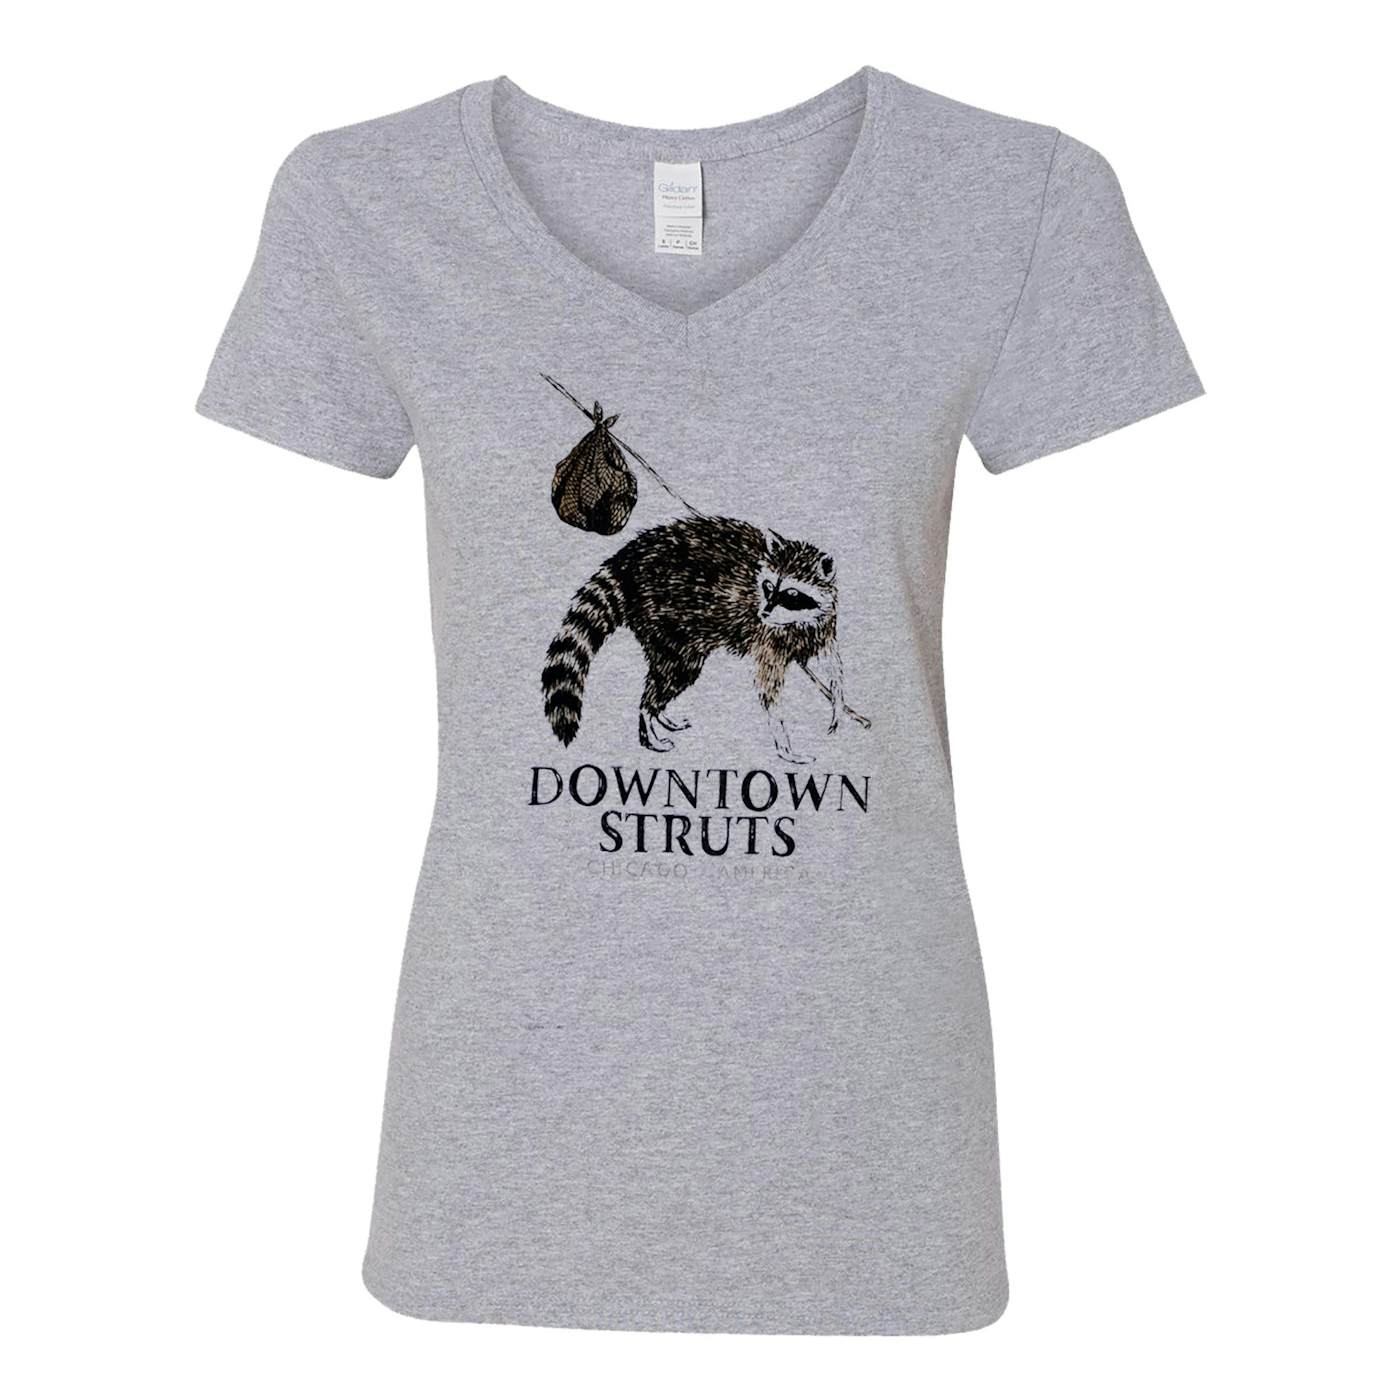 Downtown Struts - Raccoon - Grey - V-Neck - T-Shirt - Fitted